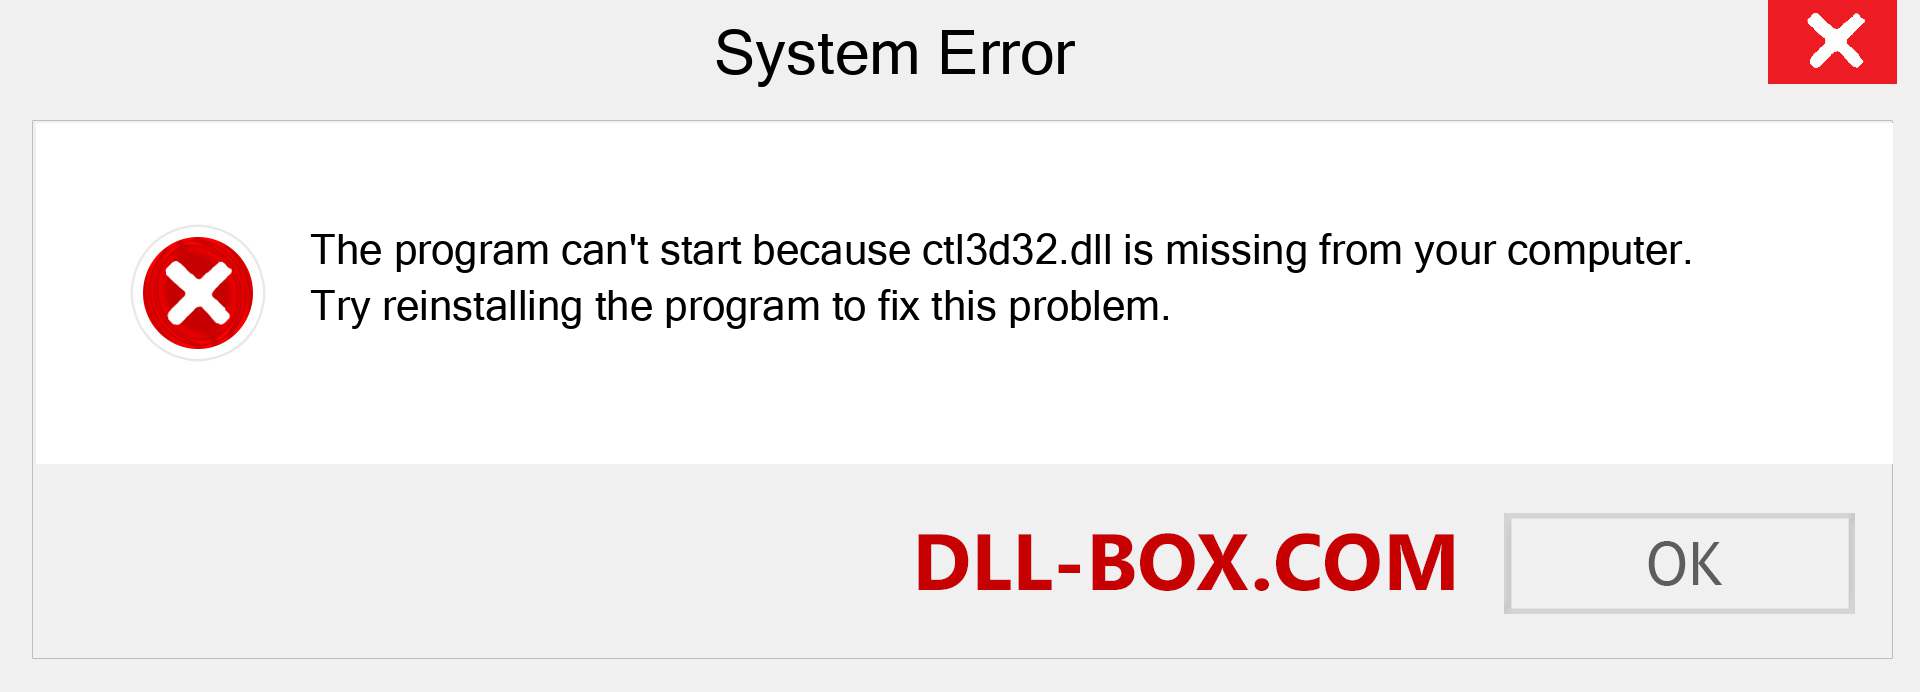  ctl3d32.dll file is missing?. Download for Windows 7, 8, 10 - Fix  ctl3d32 dll Missing Error on Windows, photos, images